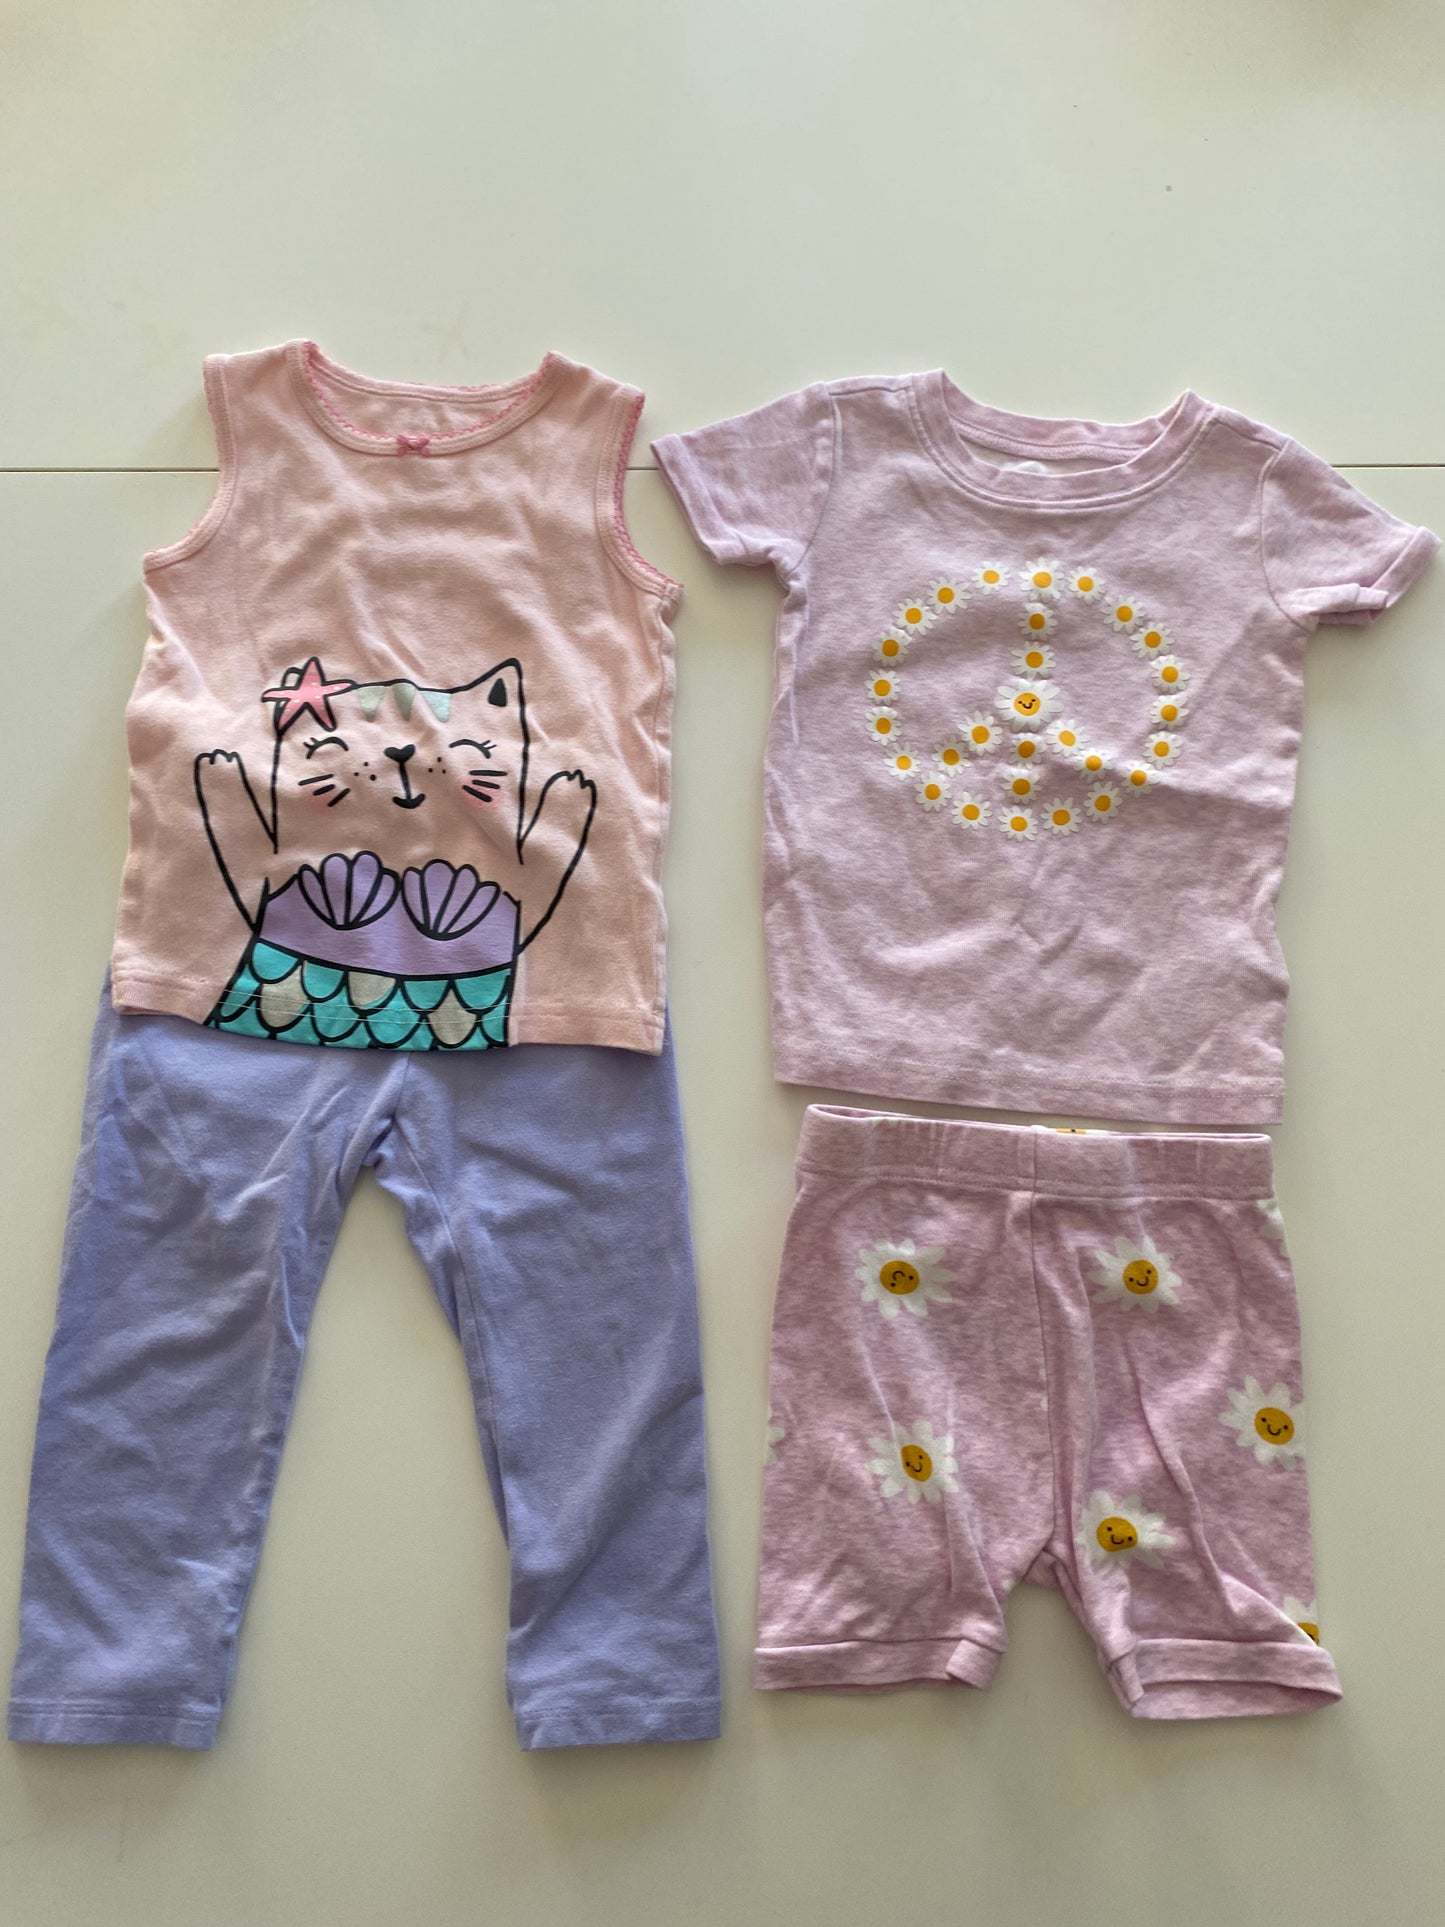 Carter’s Mercat tank top and purple pants and Old Navy flower power short sleeved pajama bundle Girls 2T